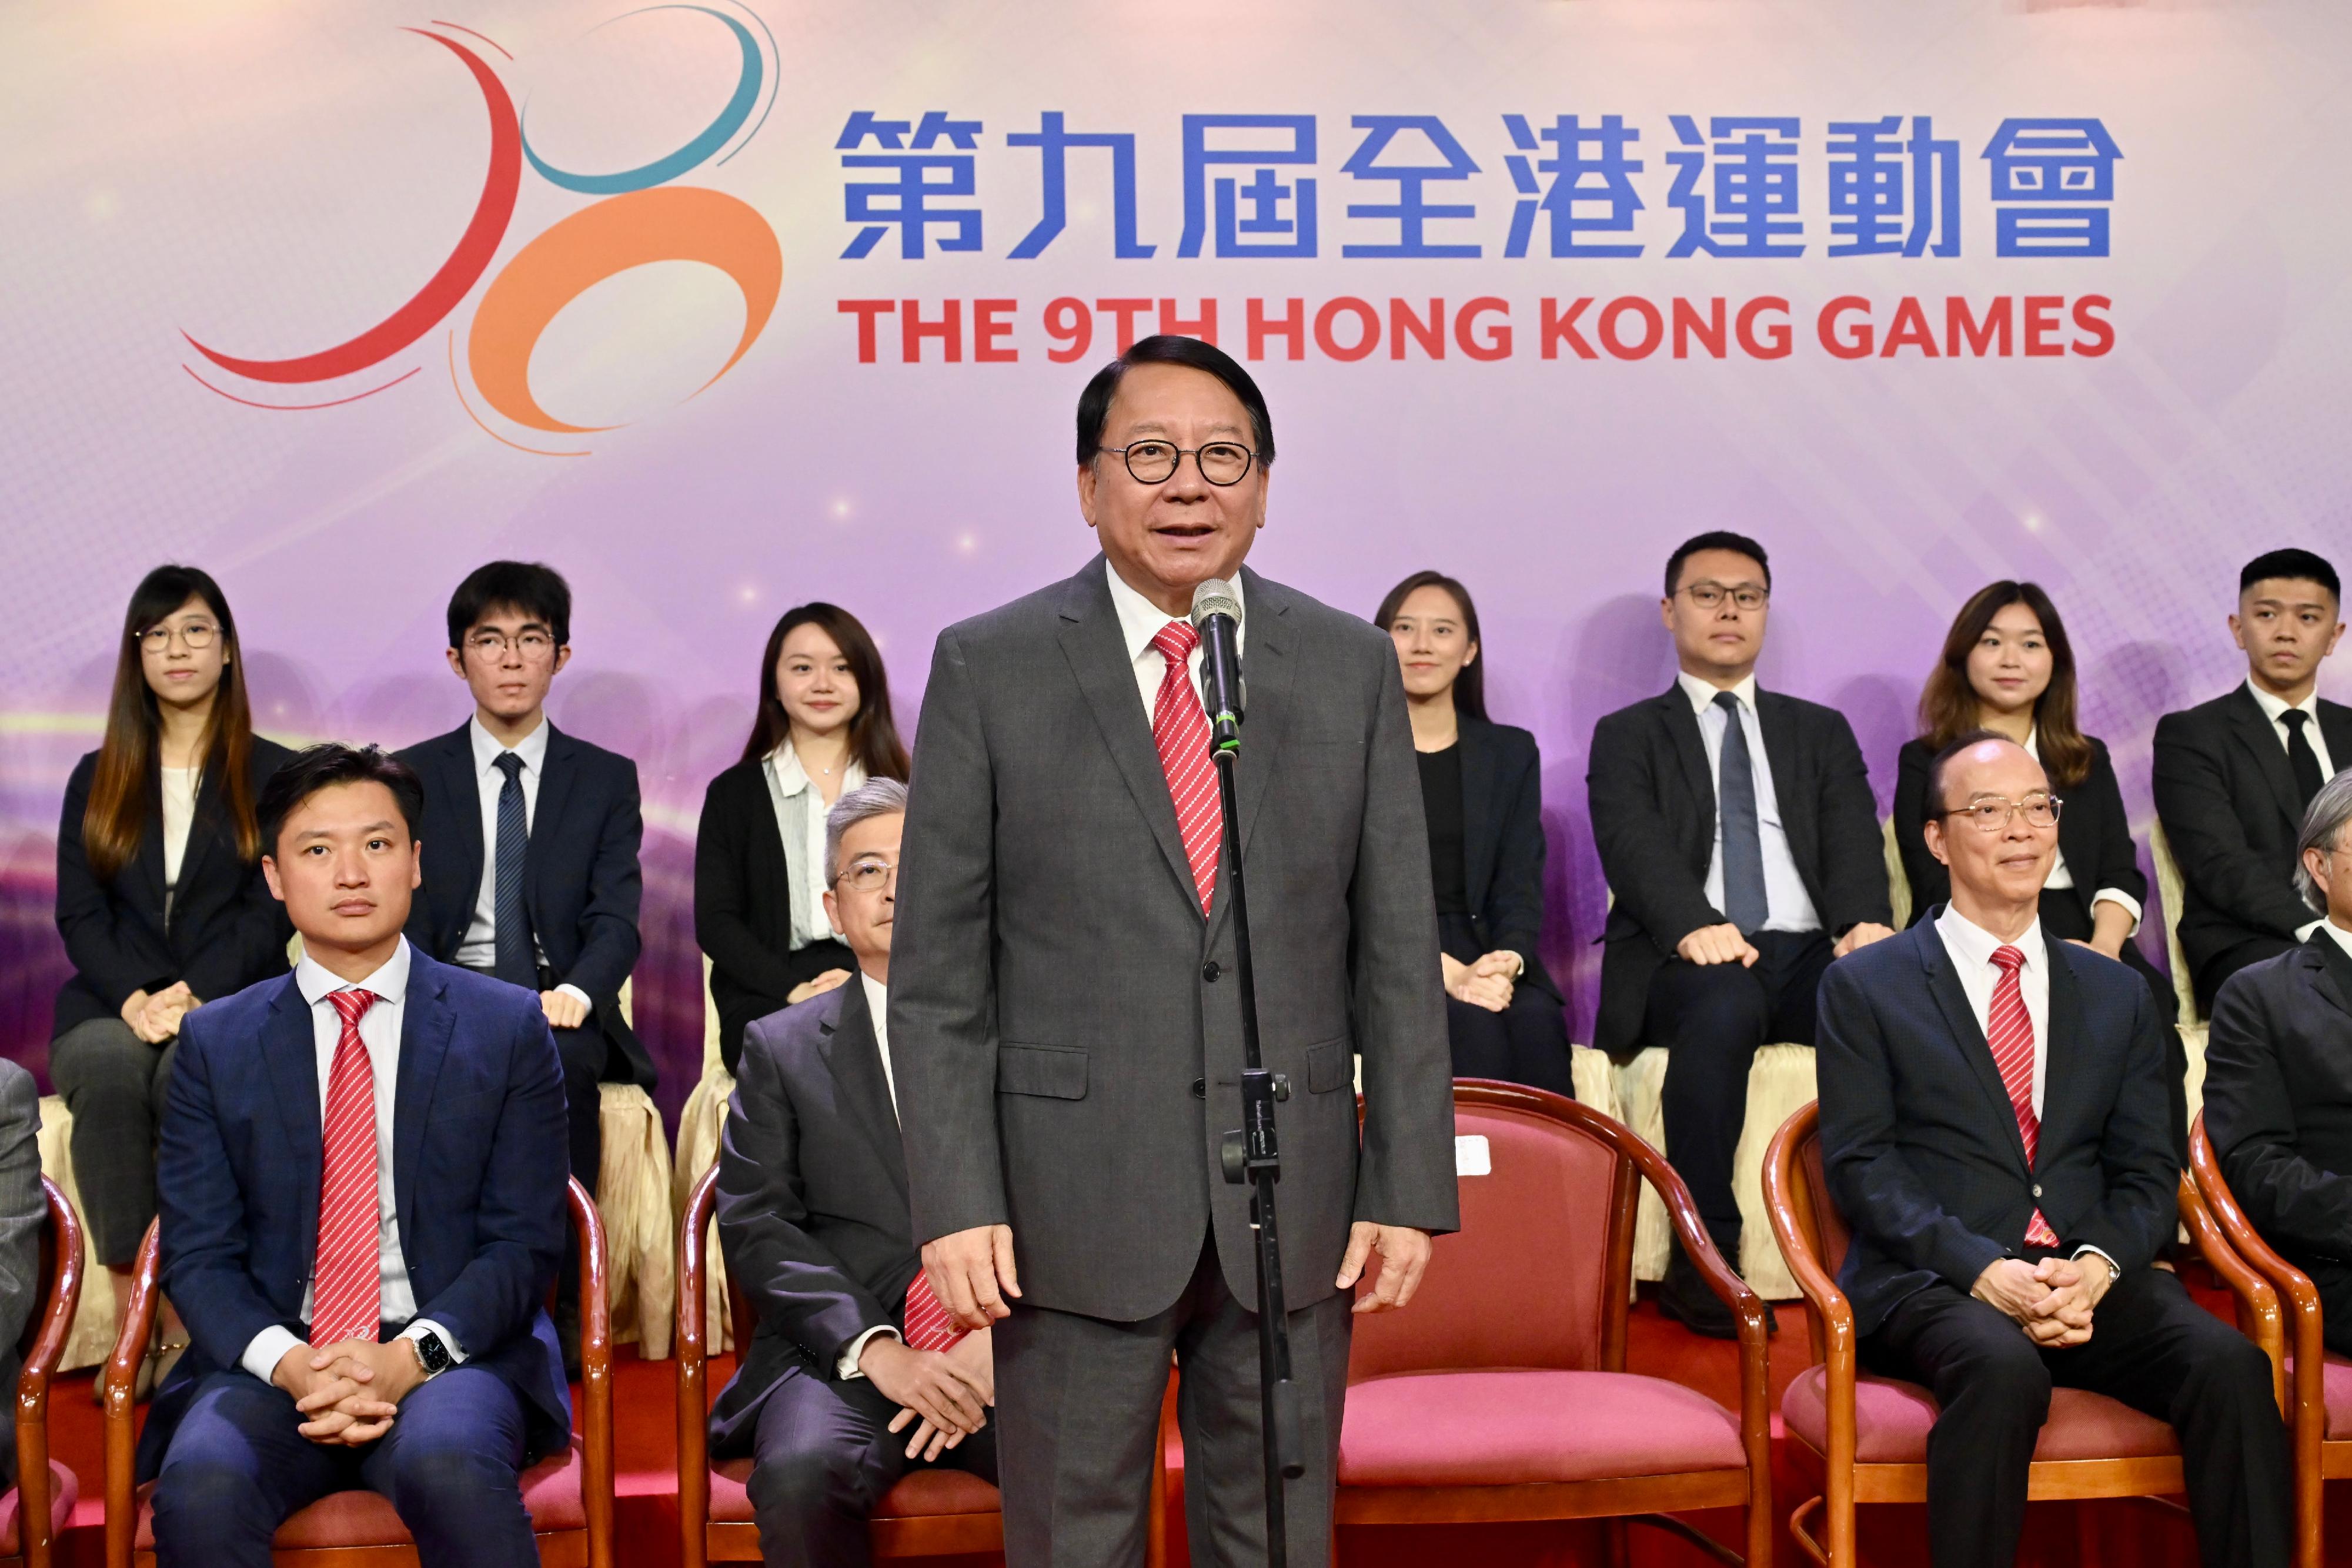 The Chief Secretary for Administration, Mr Chan Kwok-ki, officiated at the 9th Hong Kong Games Opening Ceremony at the Hong Kong Coliseum today (April 21). Photo shows Mr Chan declaring the Games open.